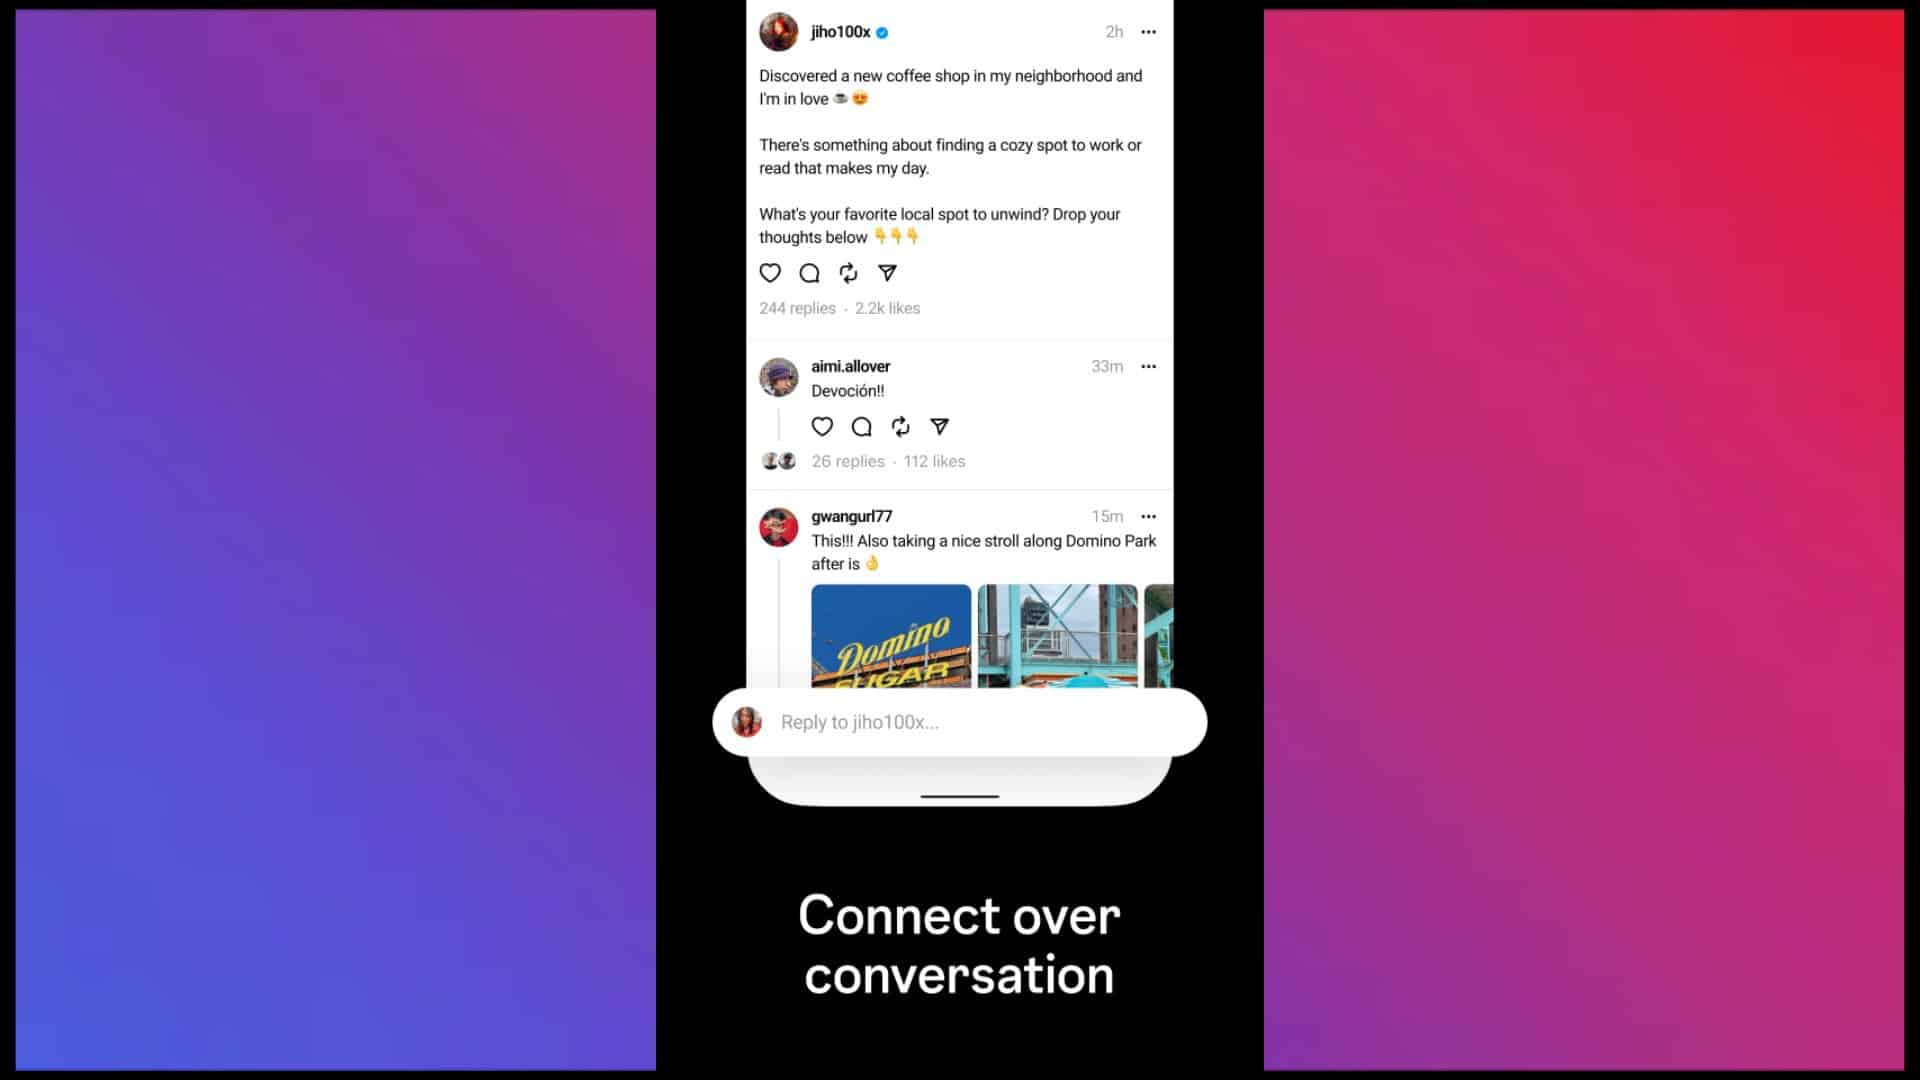 How To Create a Thread On Instagram